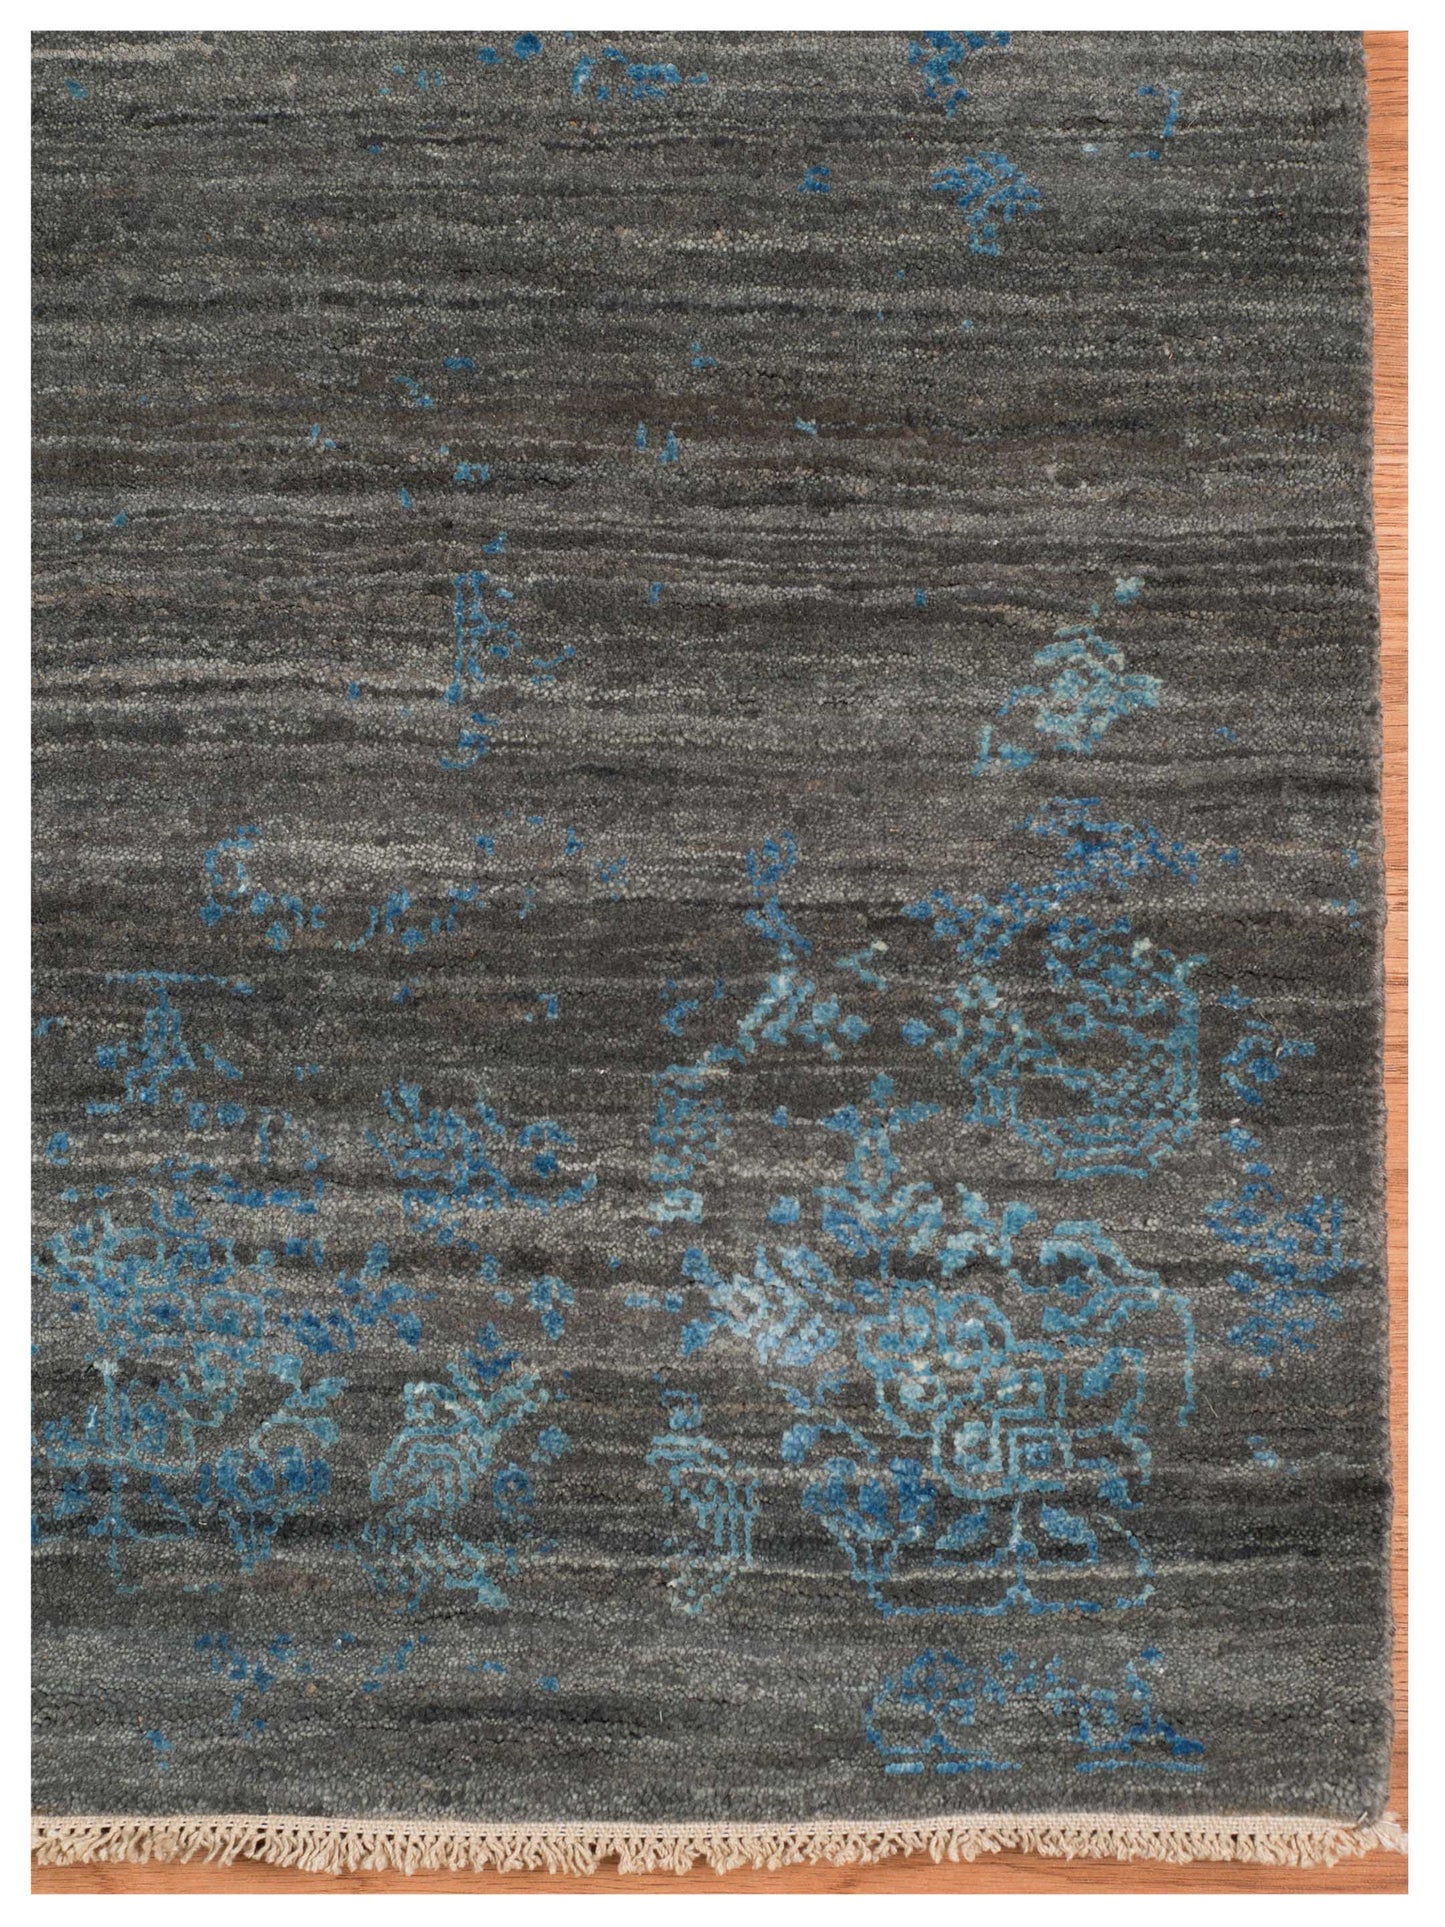 Limited PARKES PA-564 SLATE  Transitional Knotted Rug